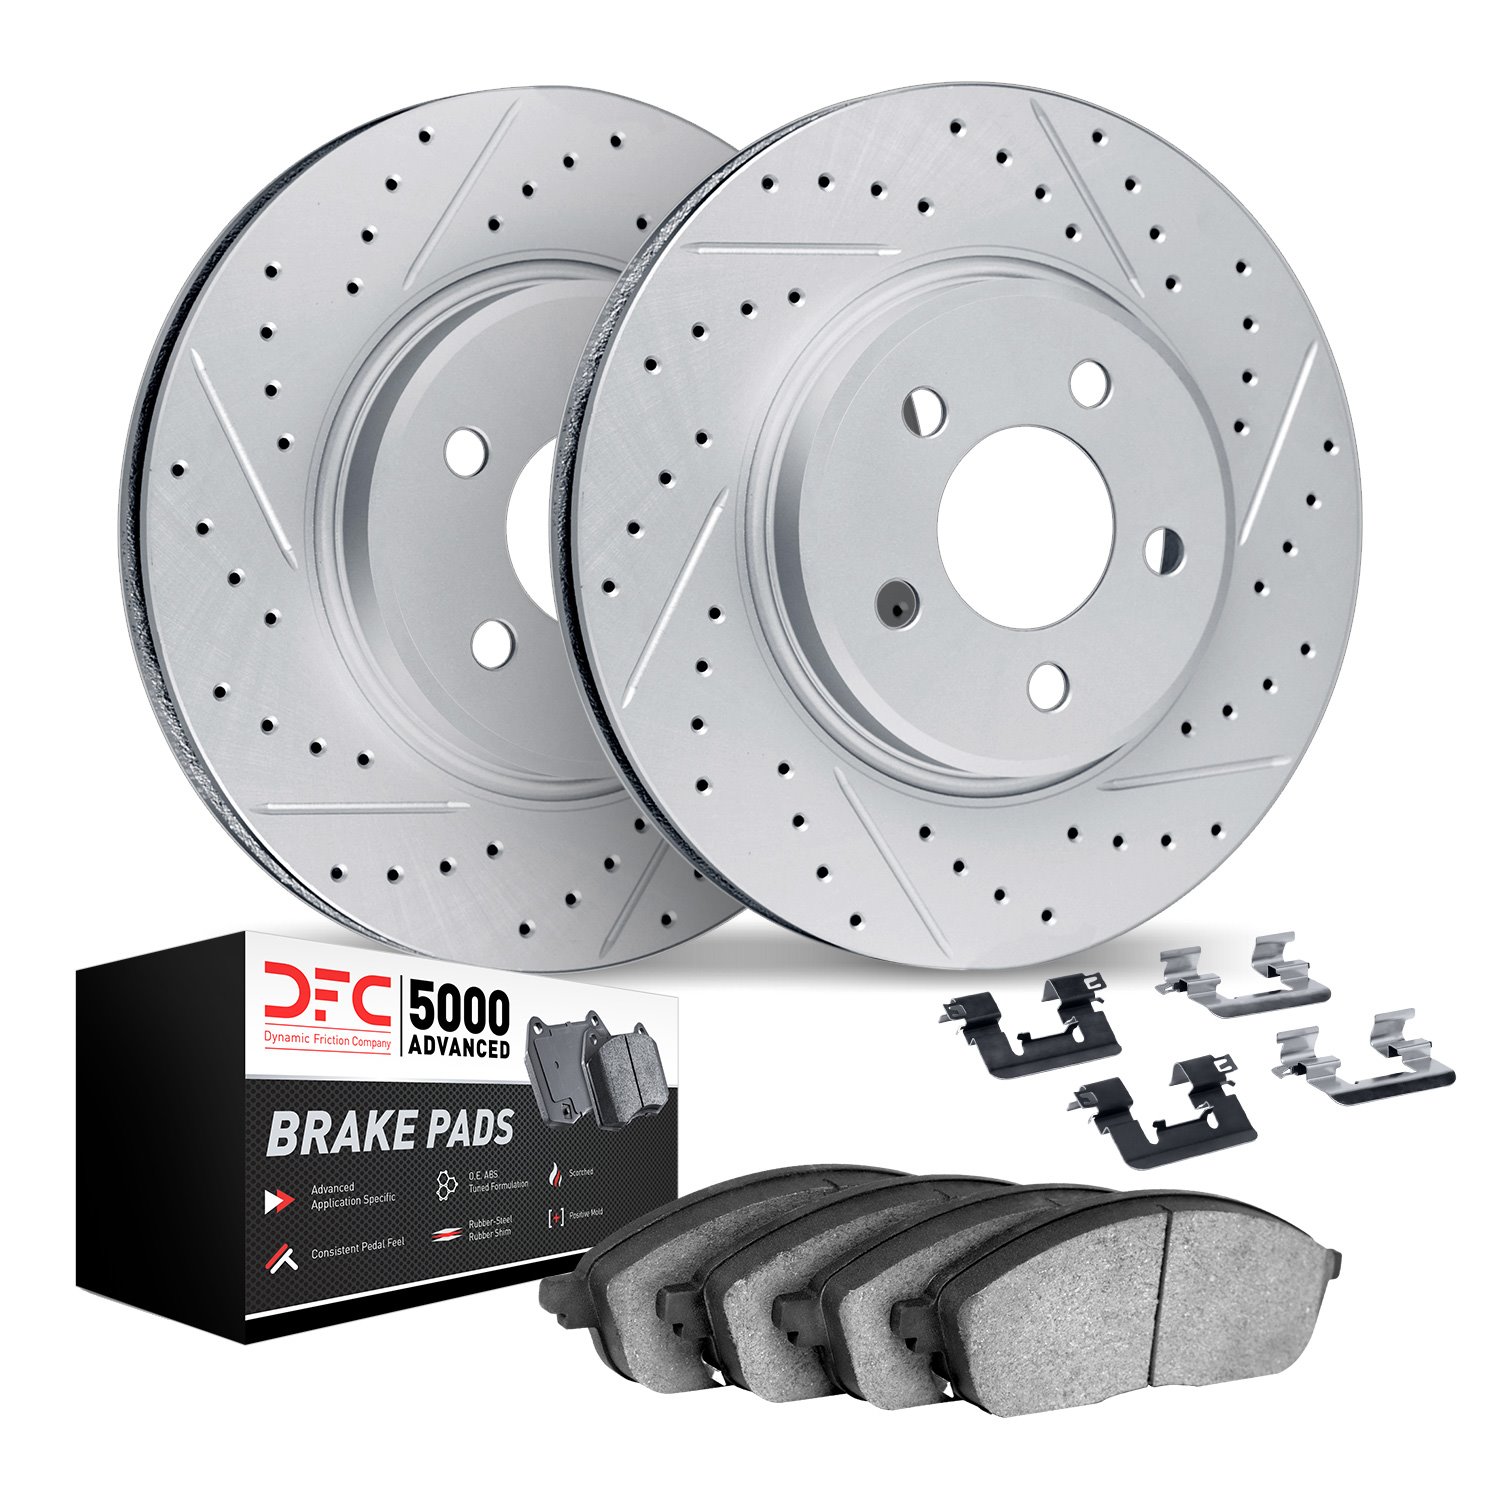 2512-63277 Geoperformance Drilled/Slotted Rotors w/5000 Advanced Brake Pads Kit & Hardware, 2013-2019 Mercedes-Benz, Position: R